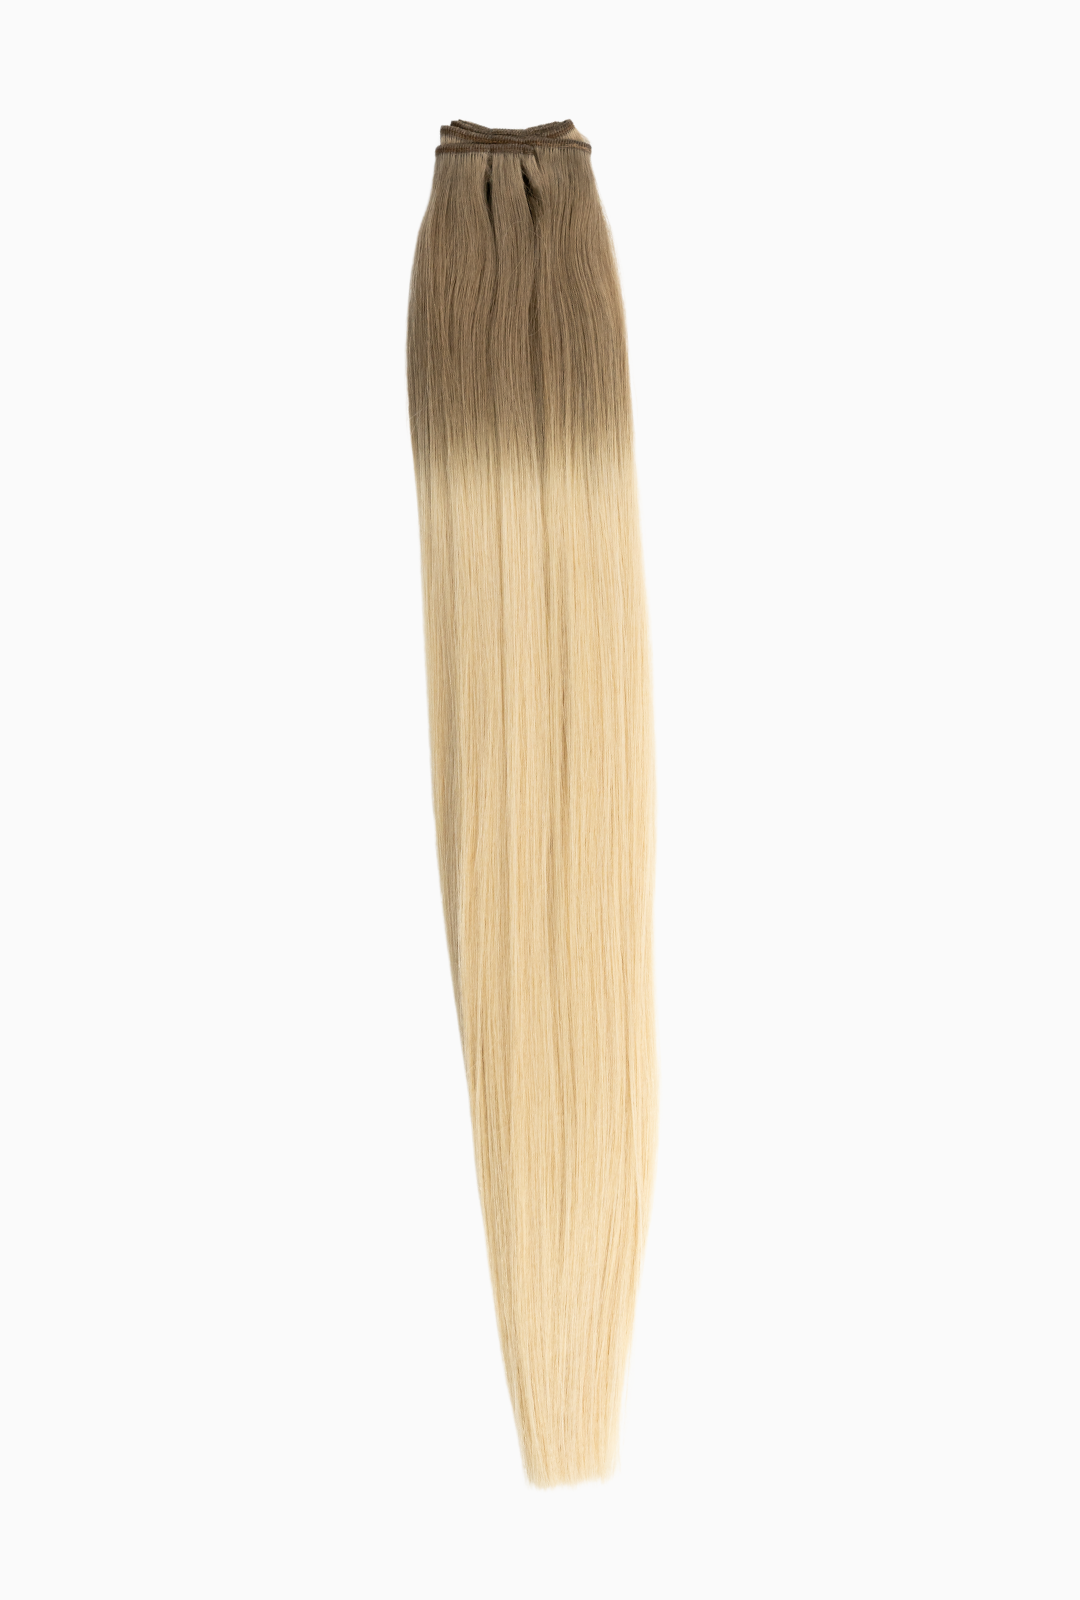 Laced Hair I-Tip Extensions Ombré #8/613